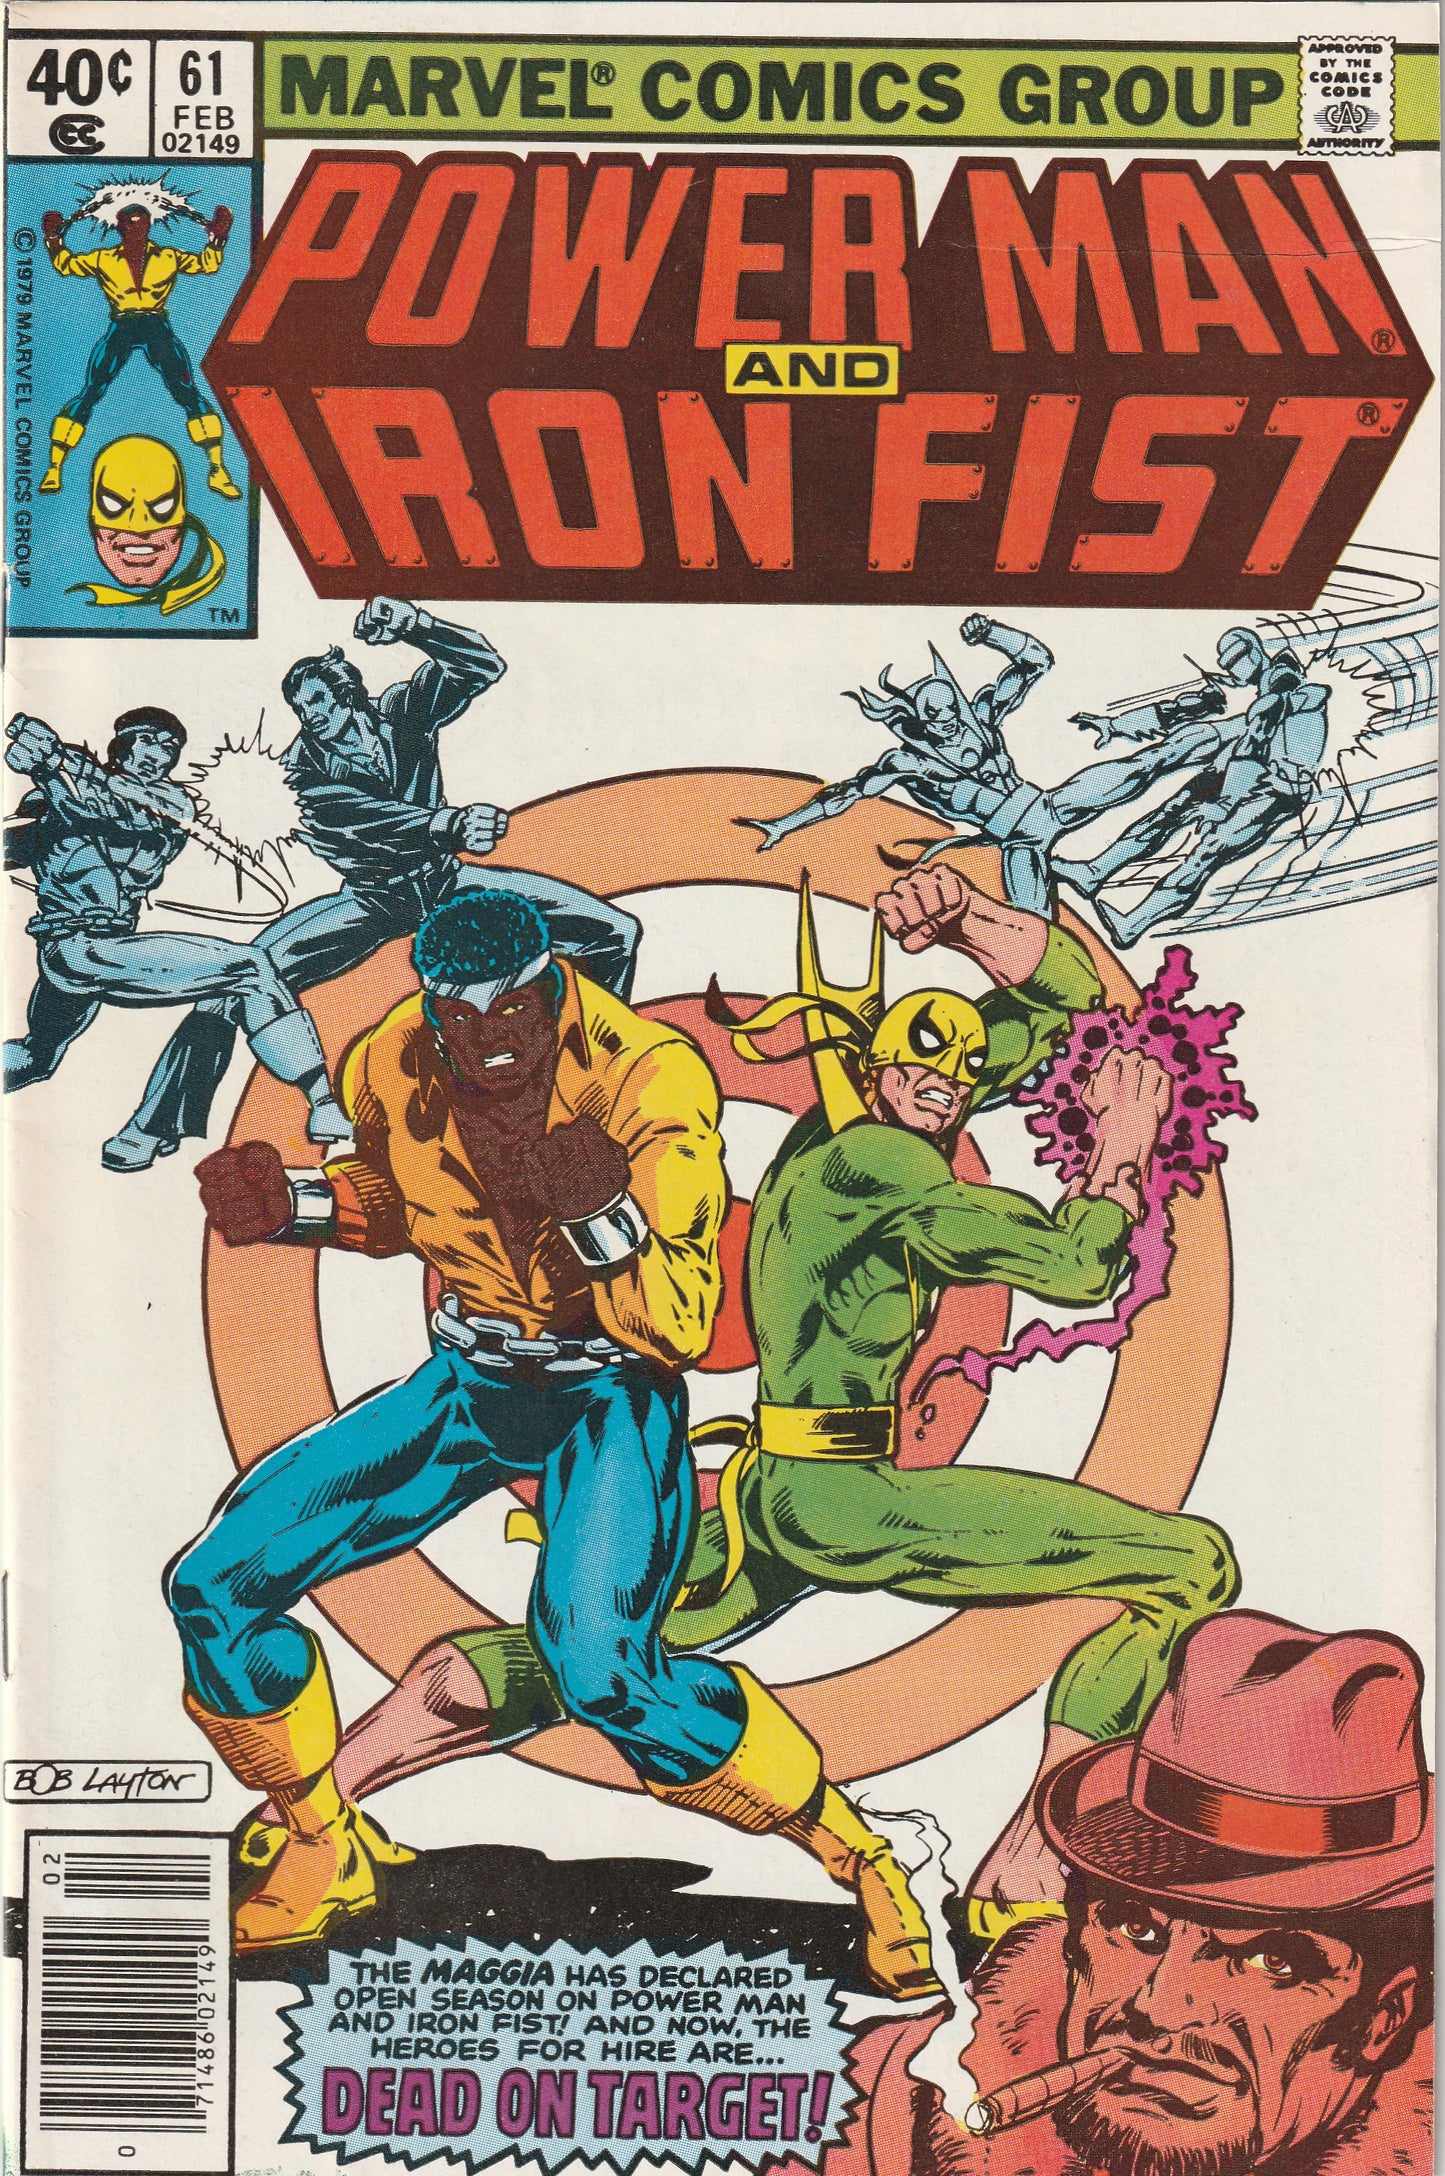 Power Man and Iron Fist #61 (1980)